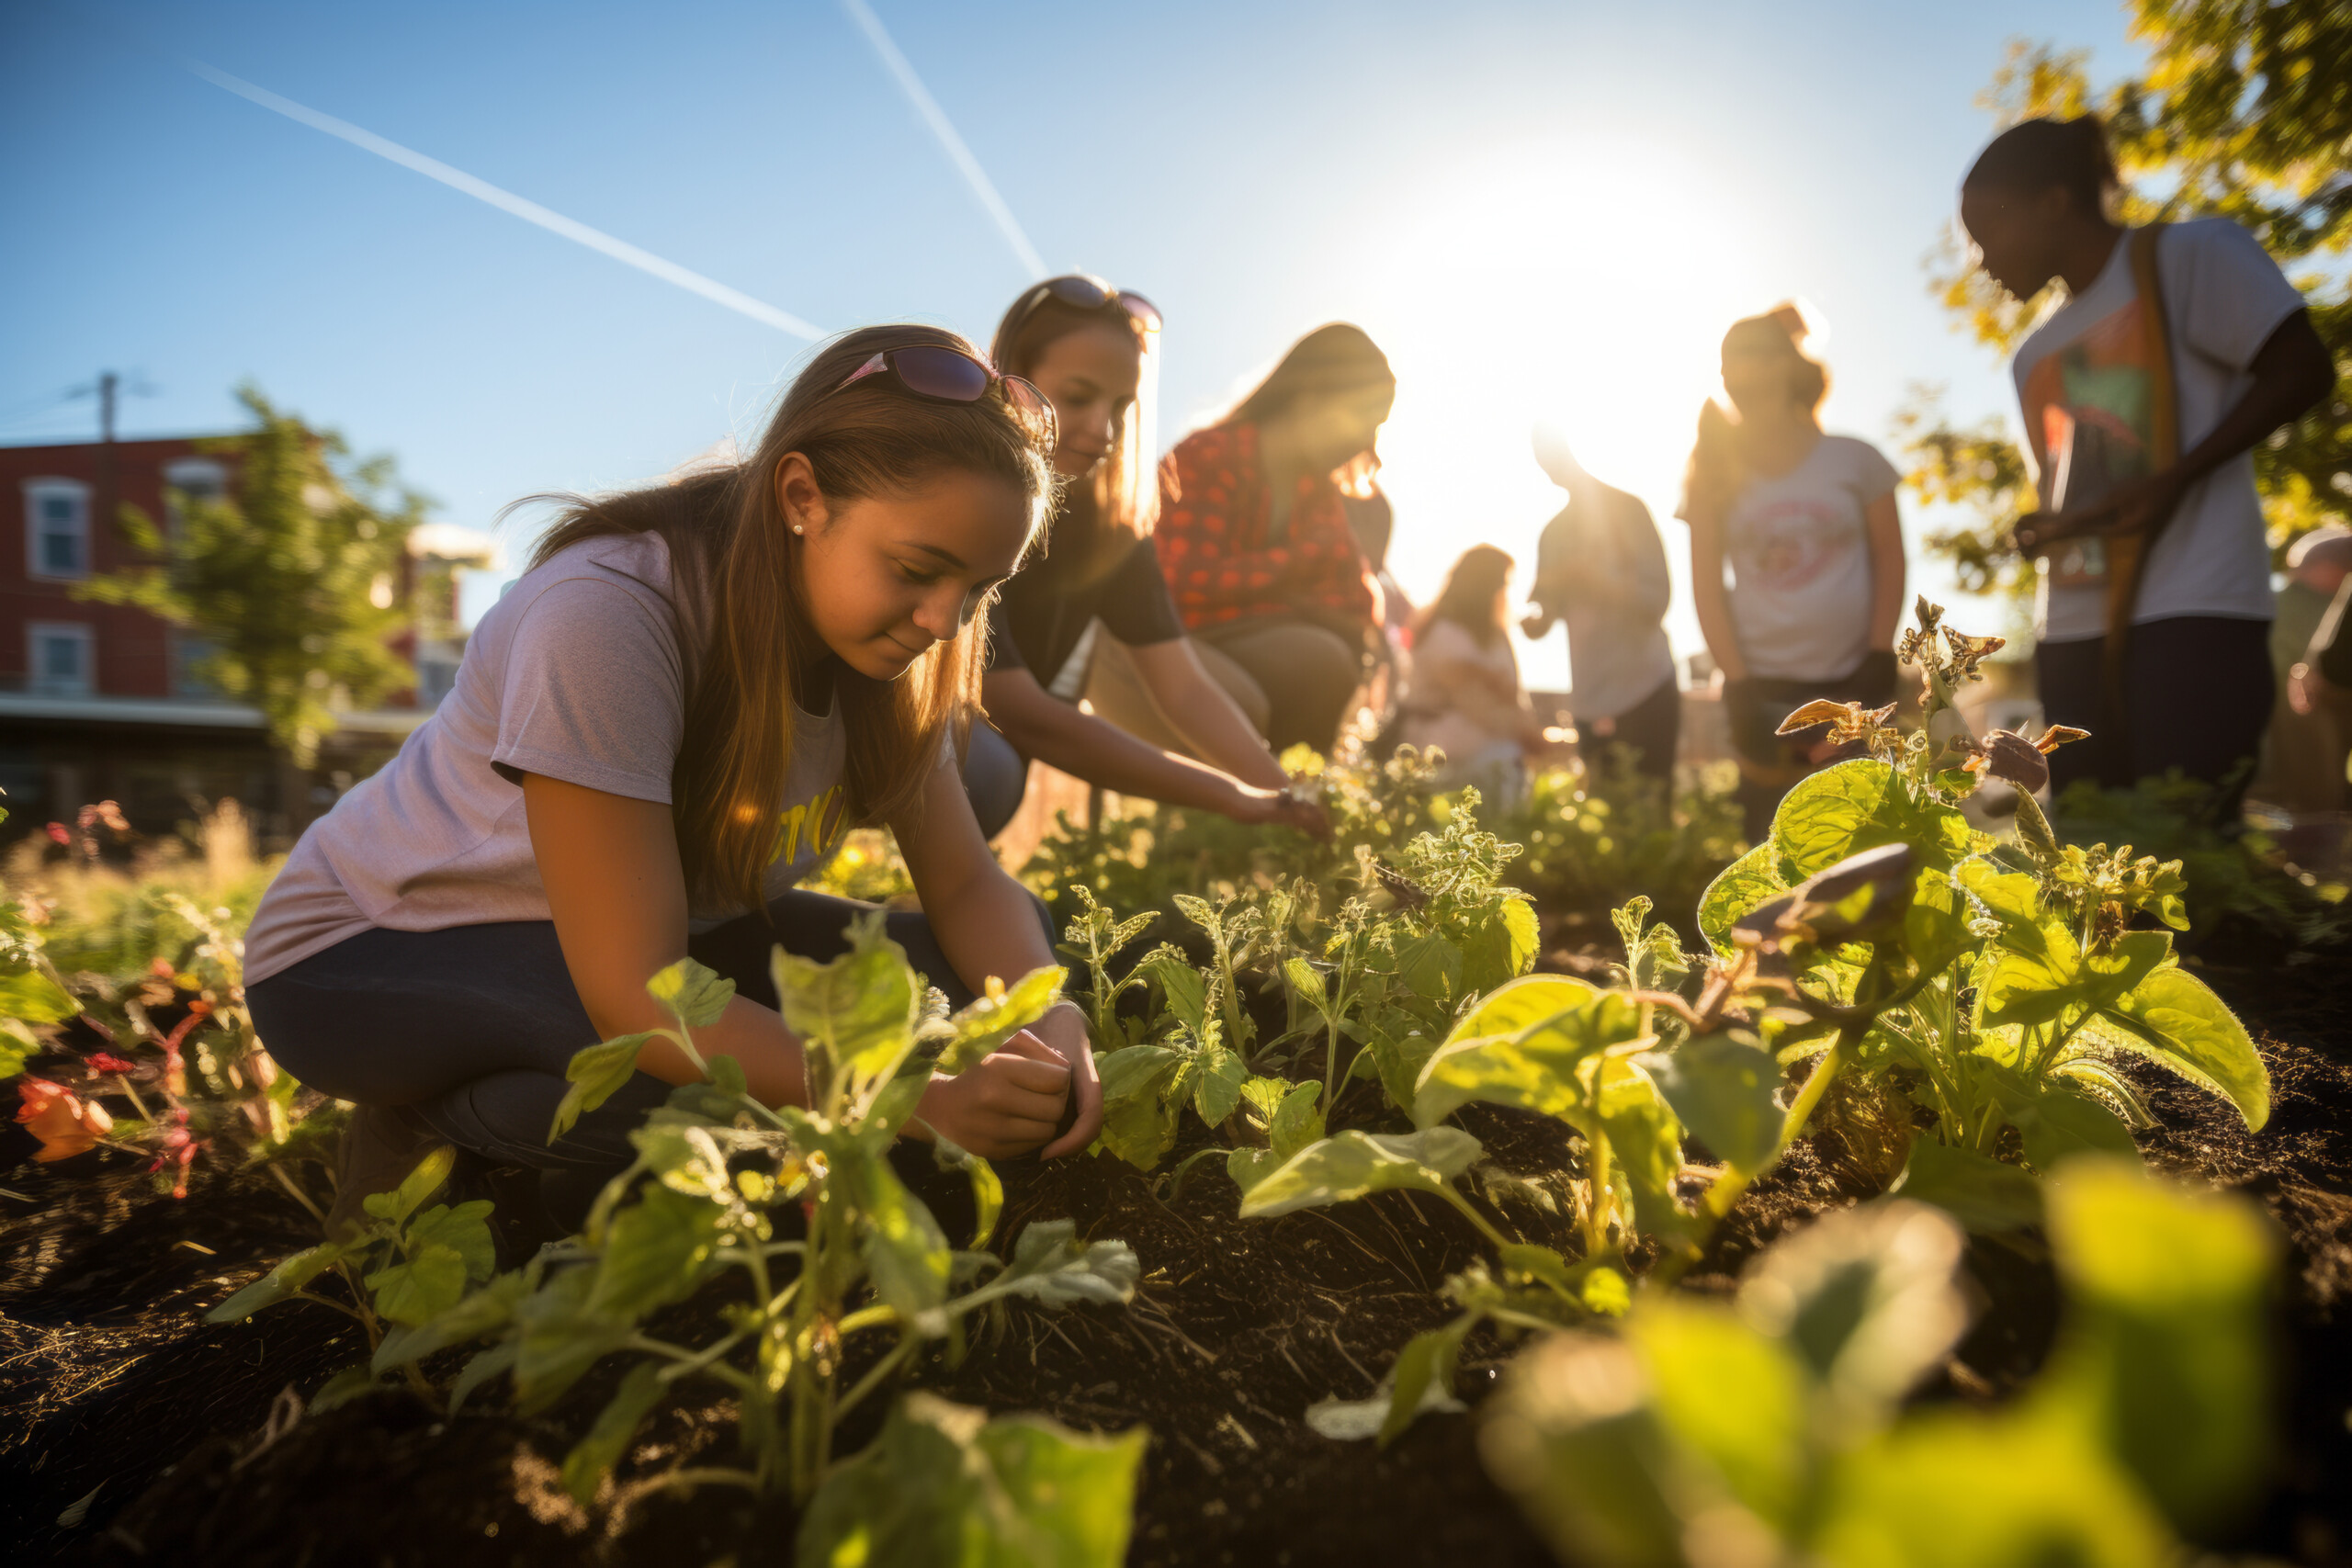 Teen girls at a community garden, planting and gardening together